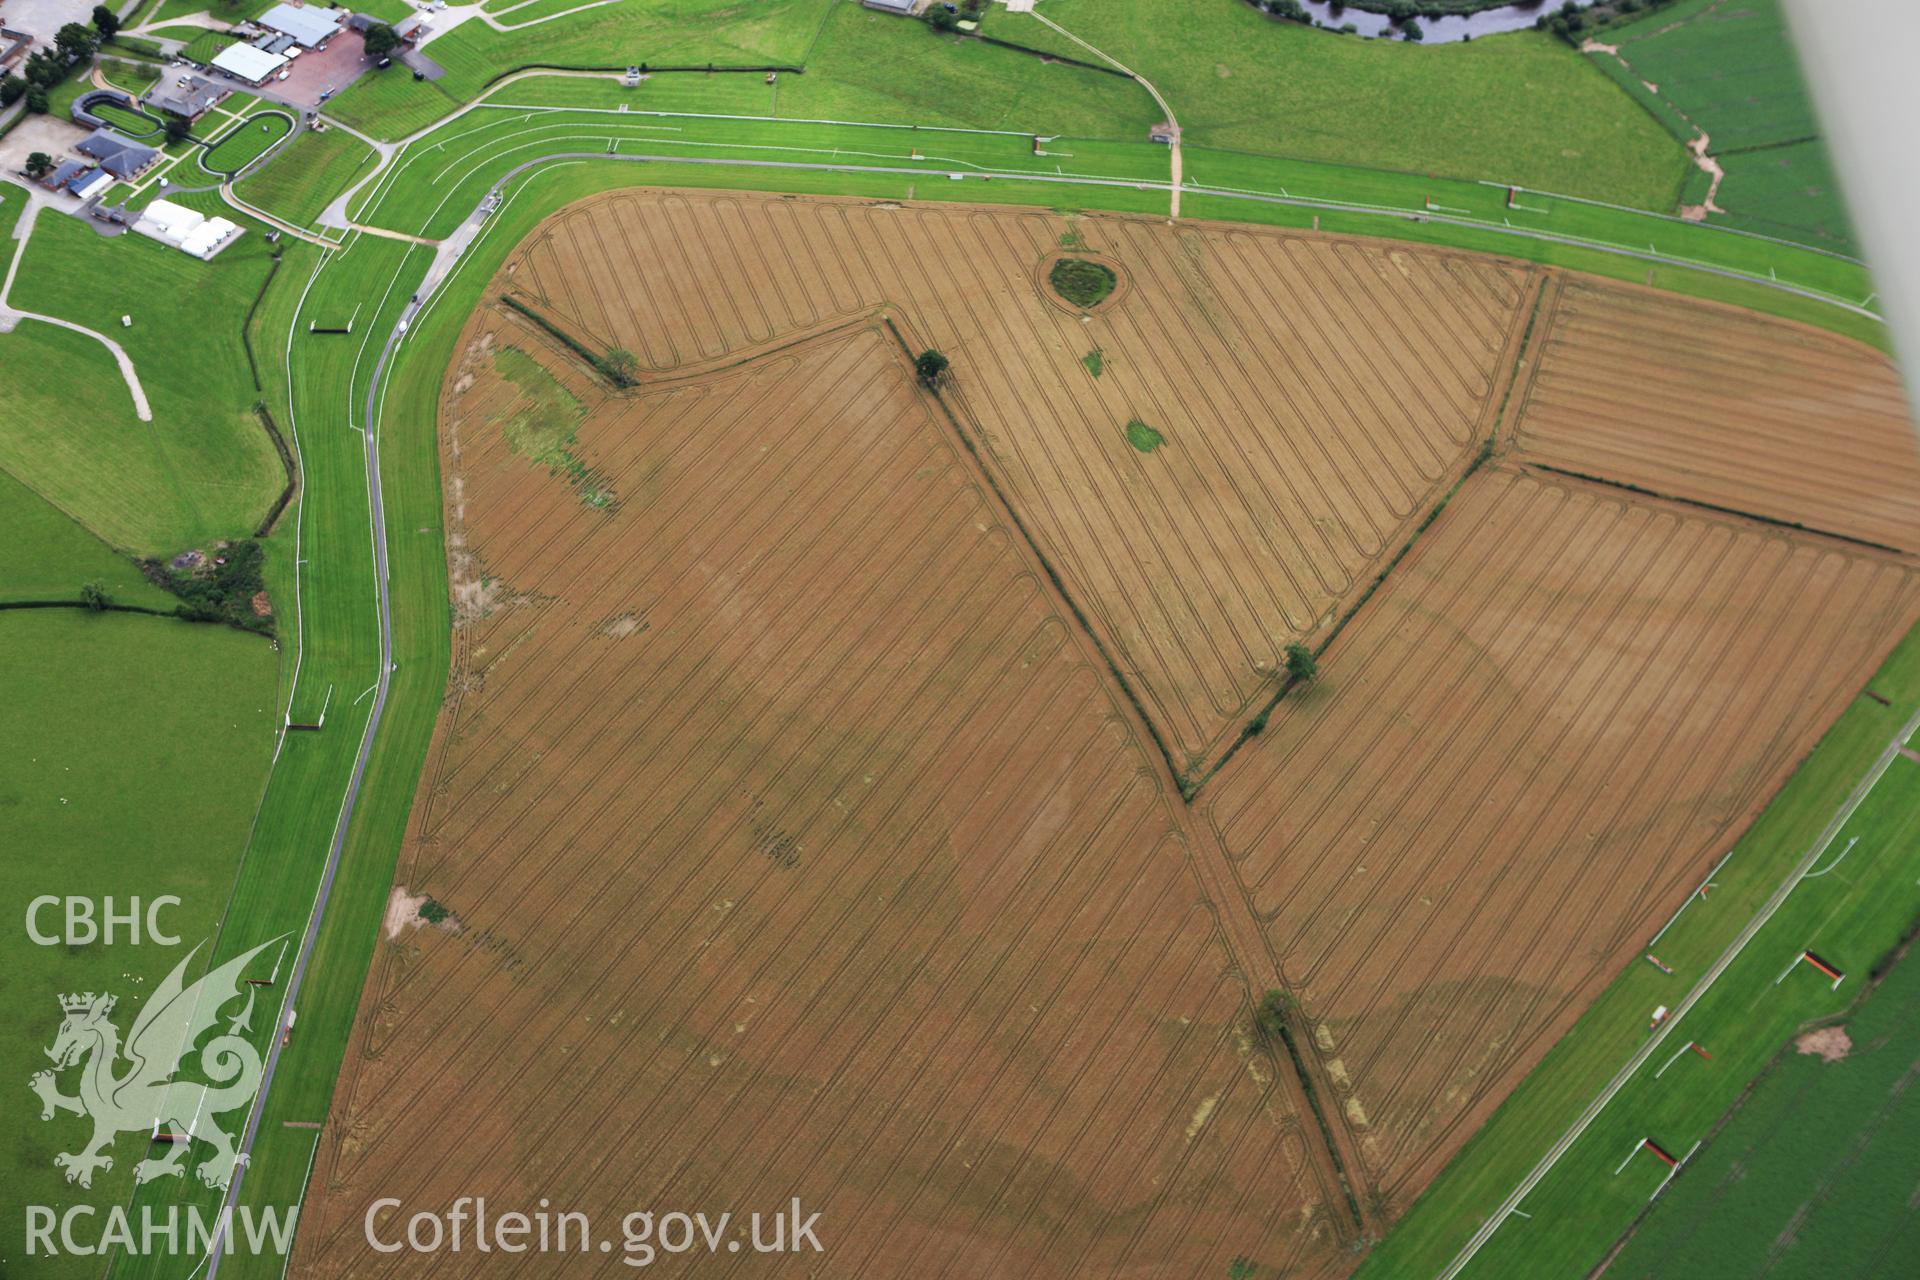 RCAHMW colour oblique aerial photograph of Bangor Race Course Enclosure. Taken on 30 July 2009 by Toby Driver